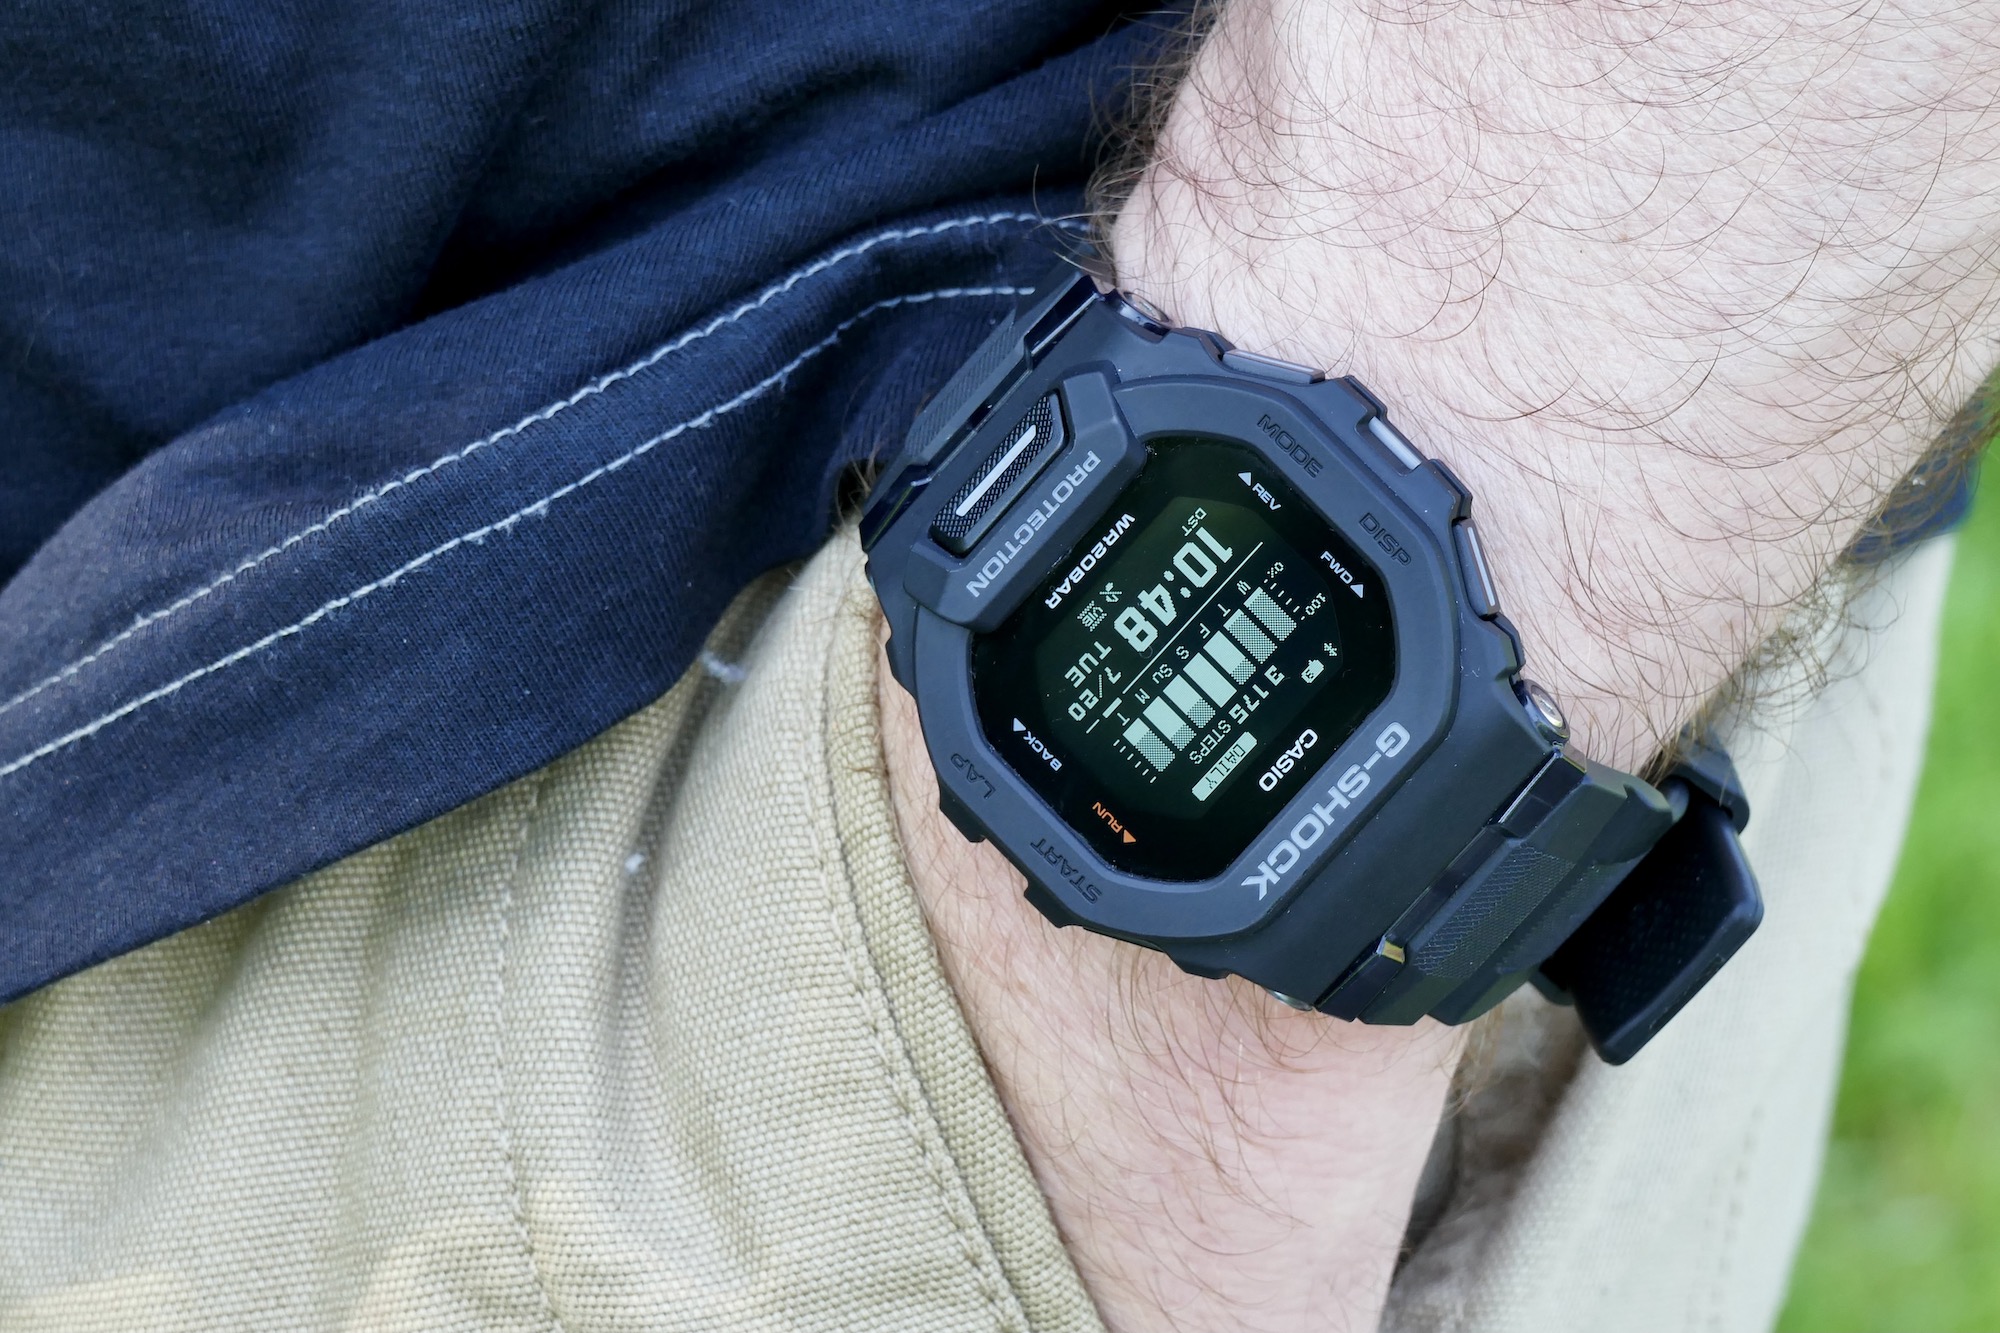 Casio G-Shock GBD-200 Review: Perfectly Balanced